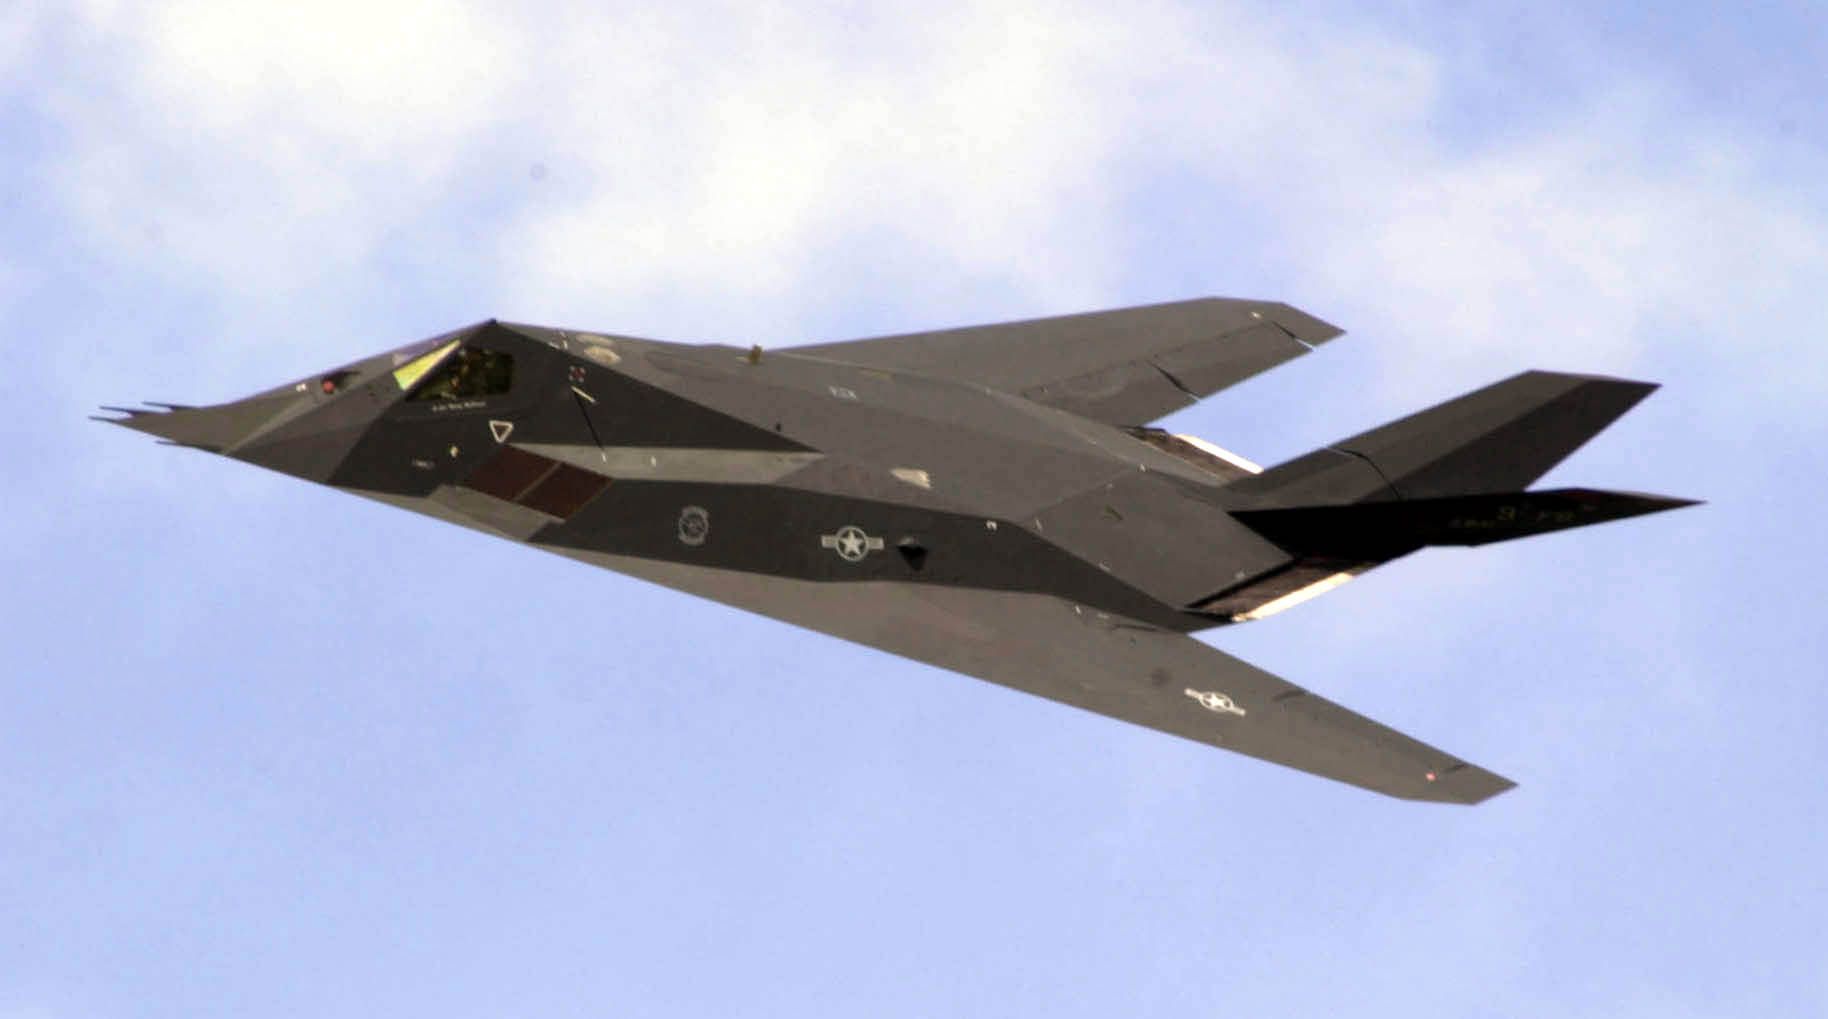 an-american-f-117a-nighthawk-stealth-fighter-one-of-the-news-photo-1595446919.jpg